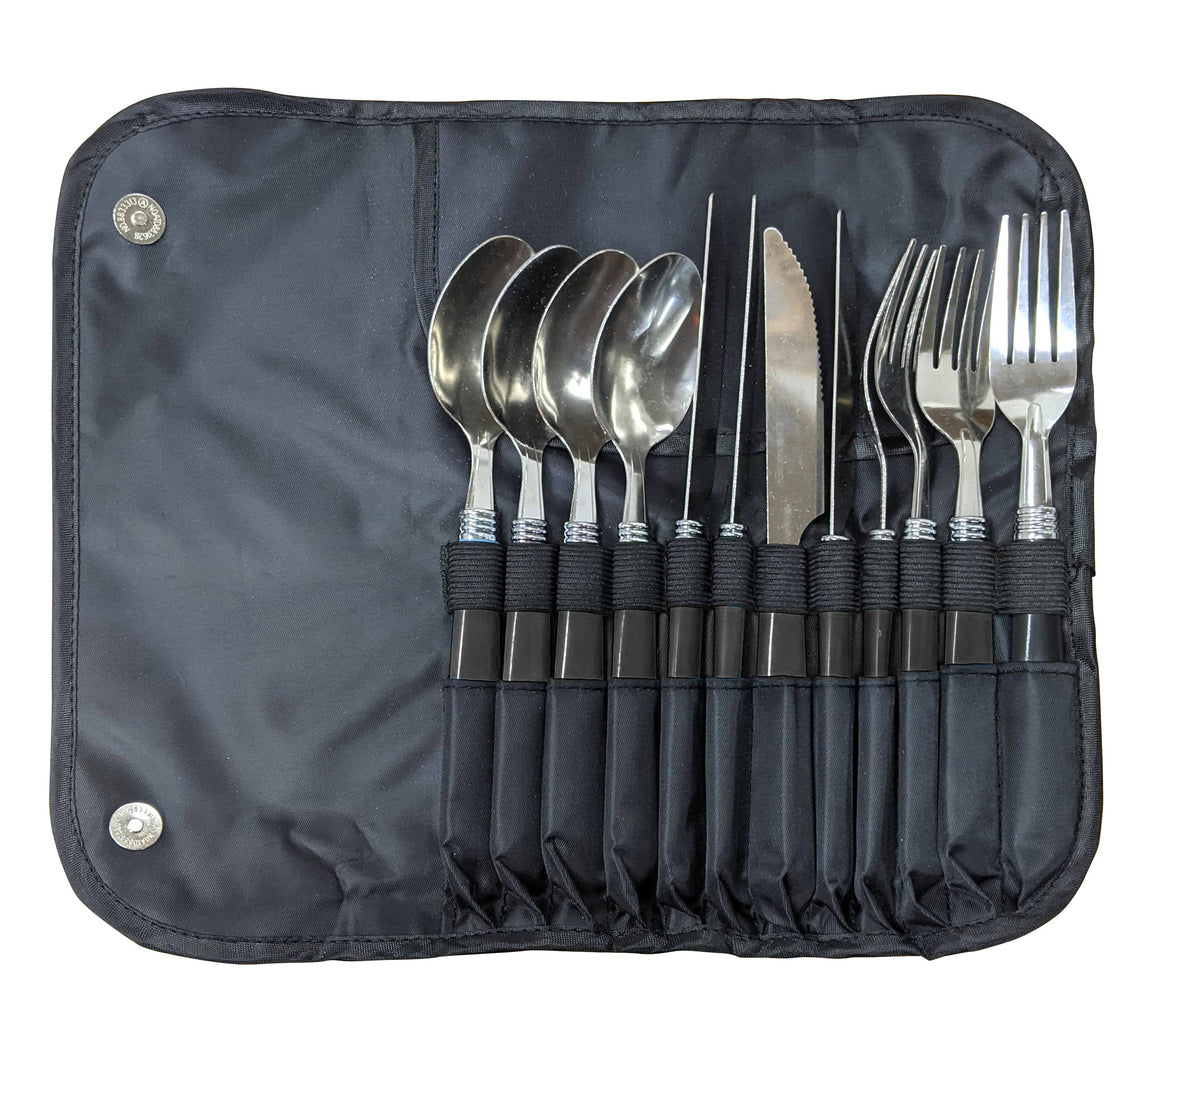 12 PIECE STAINLESS STEEL CUTLERY SET IN POUCH